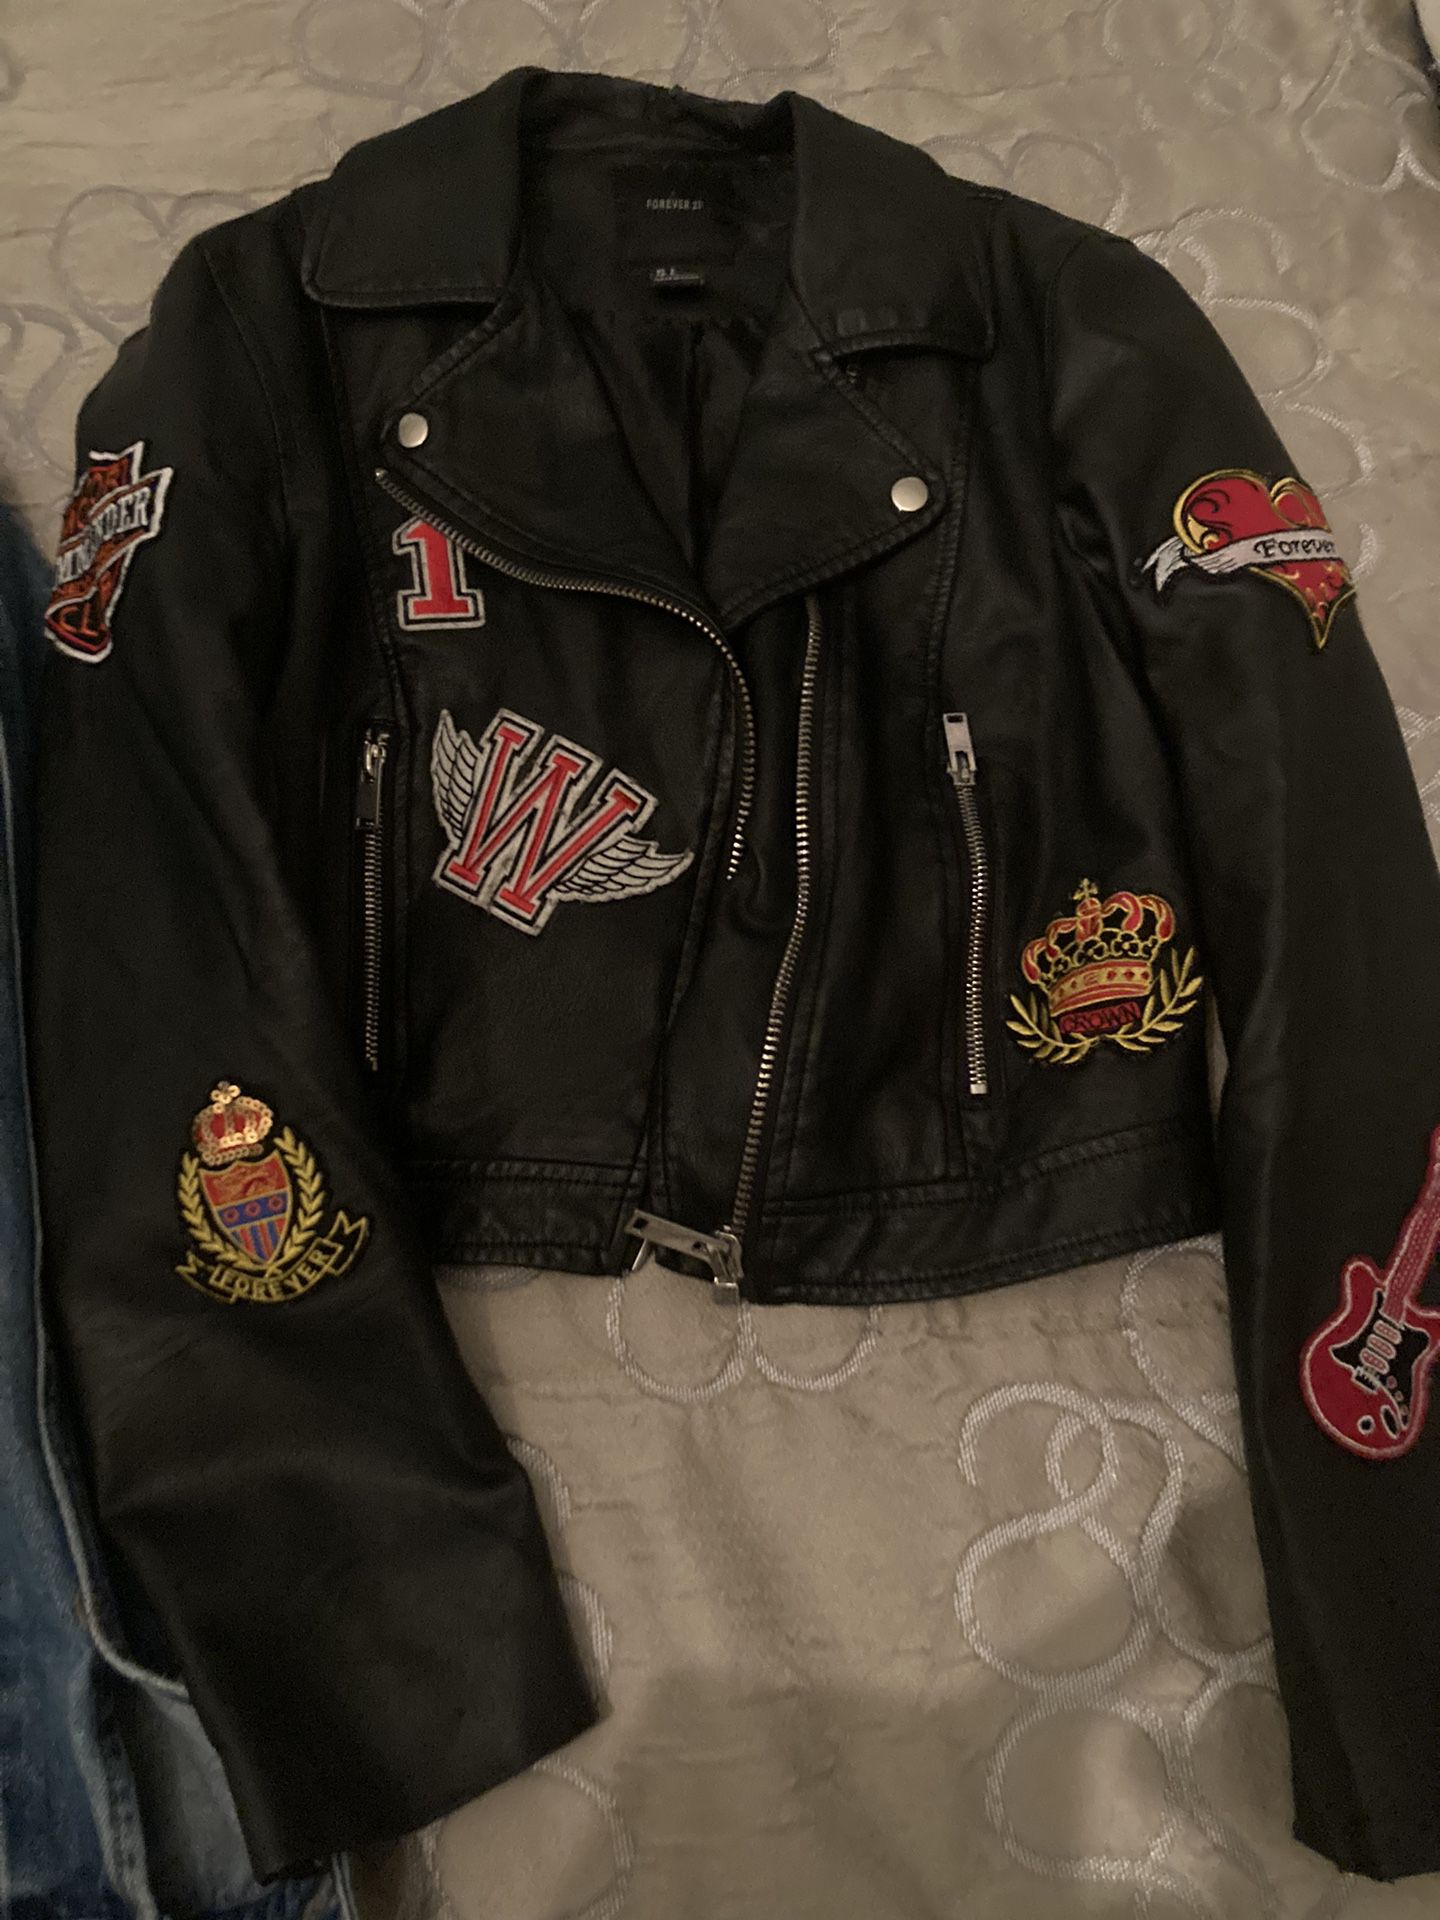 2 Forever 21 Size Small Jackets One Jean One Leather 